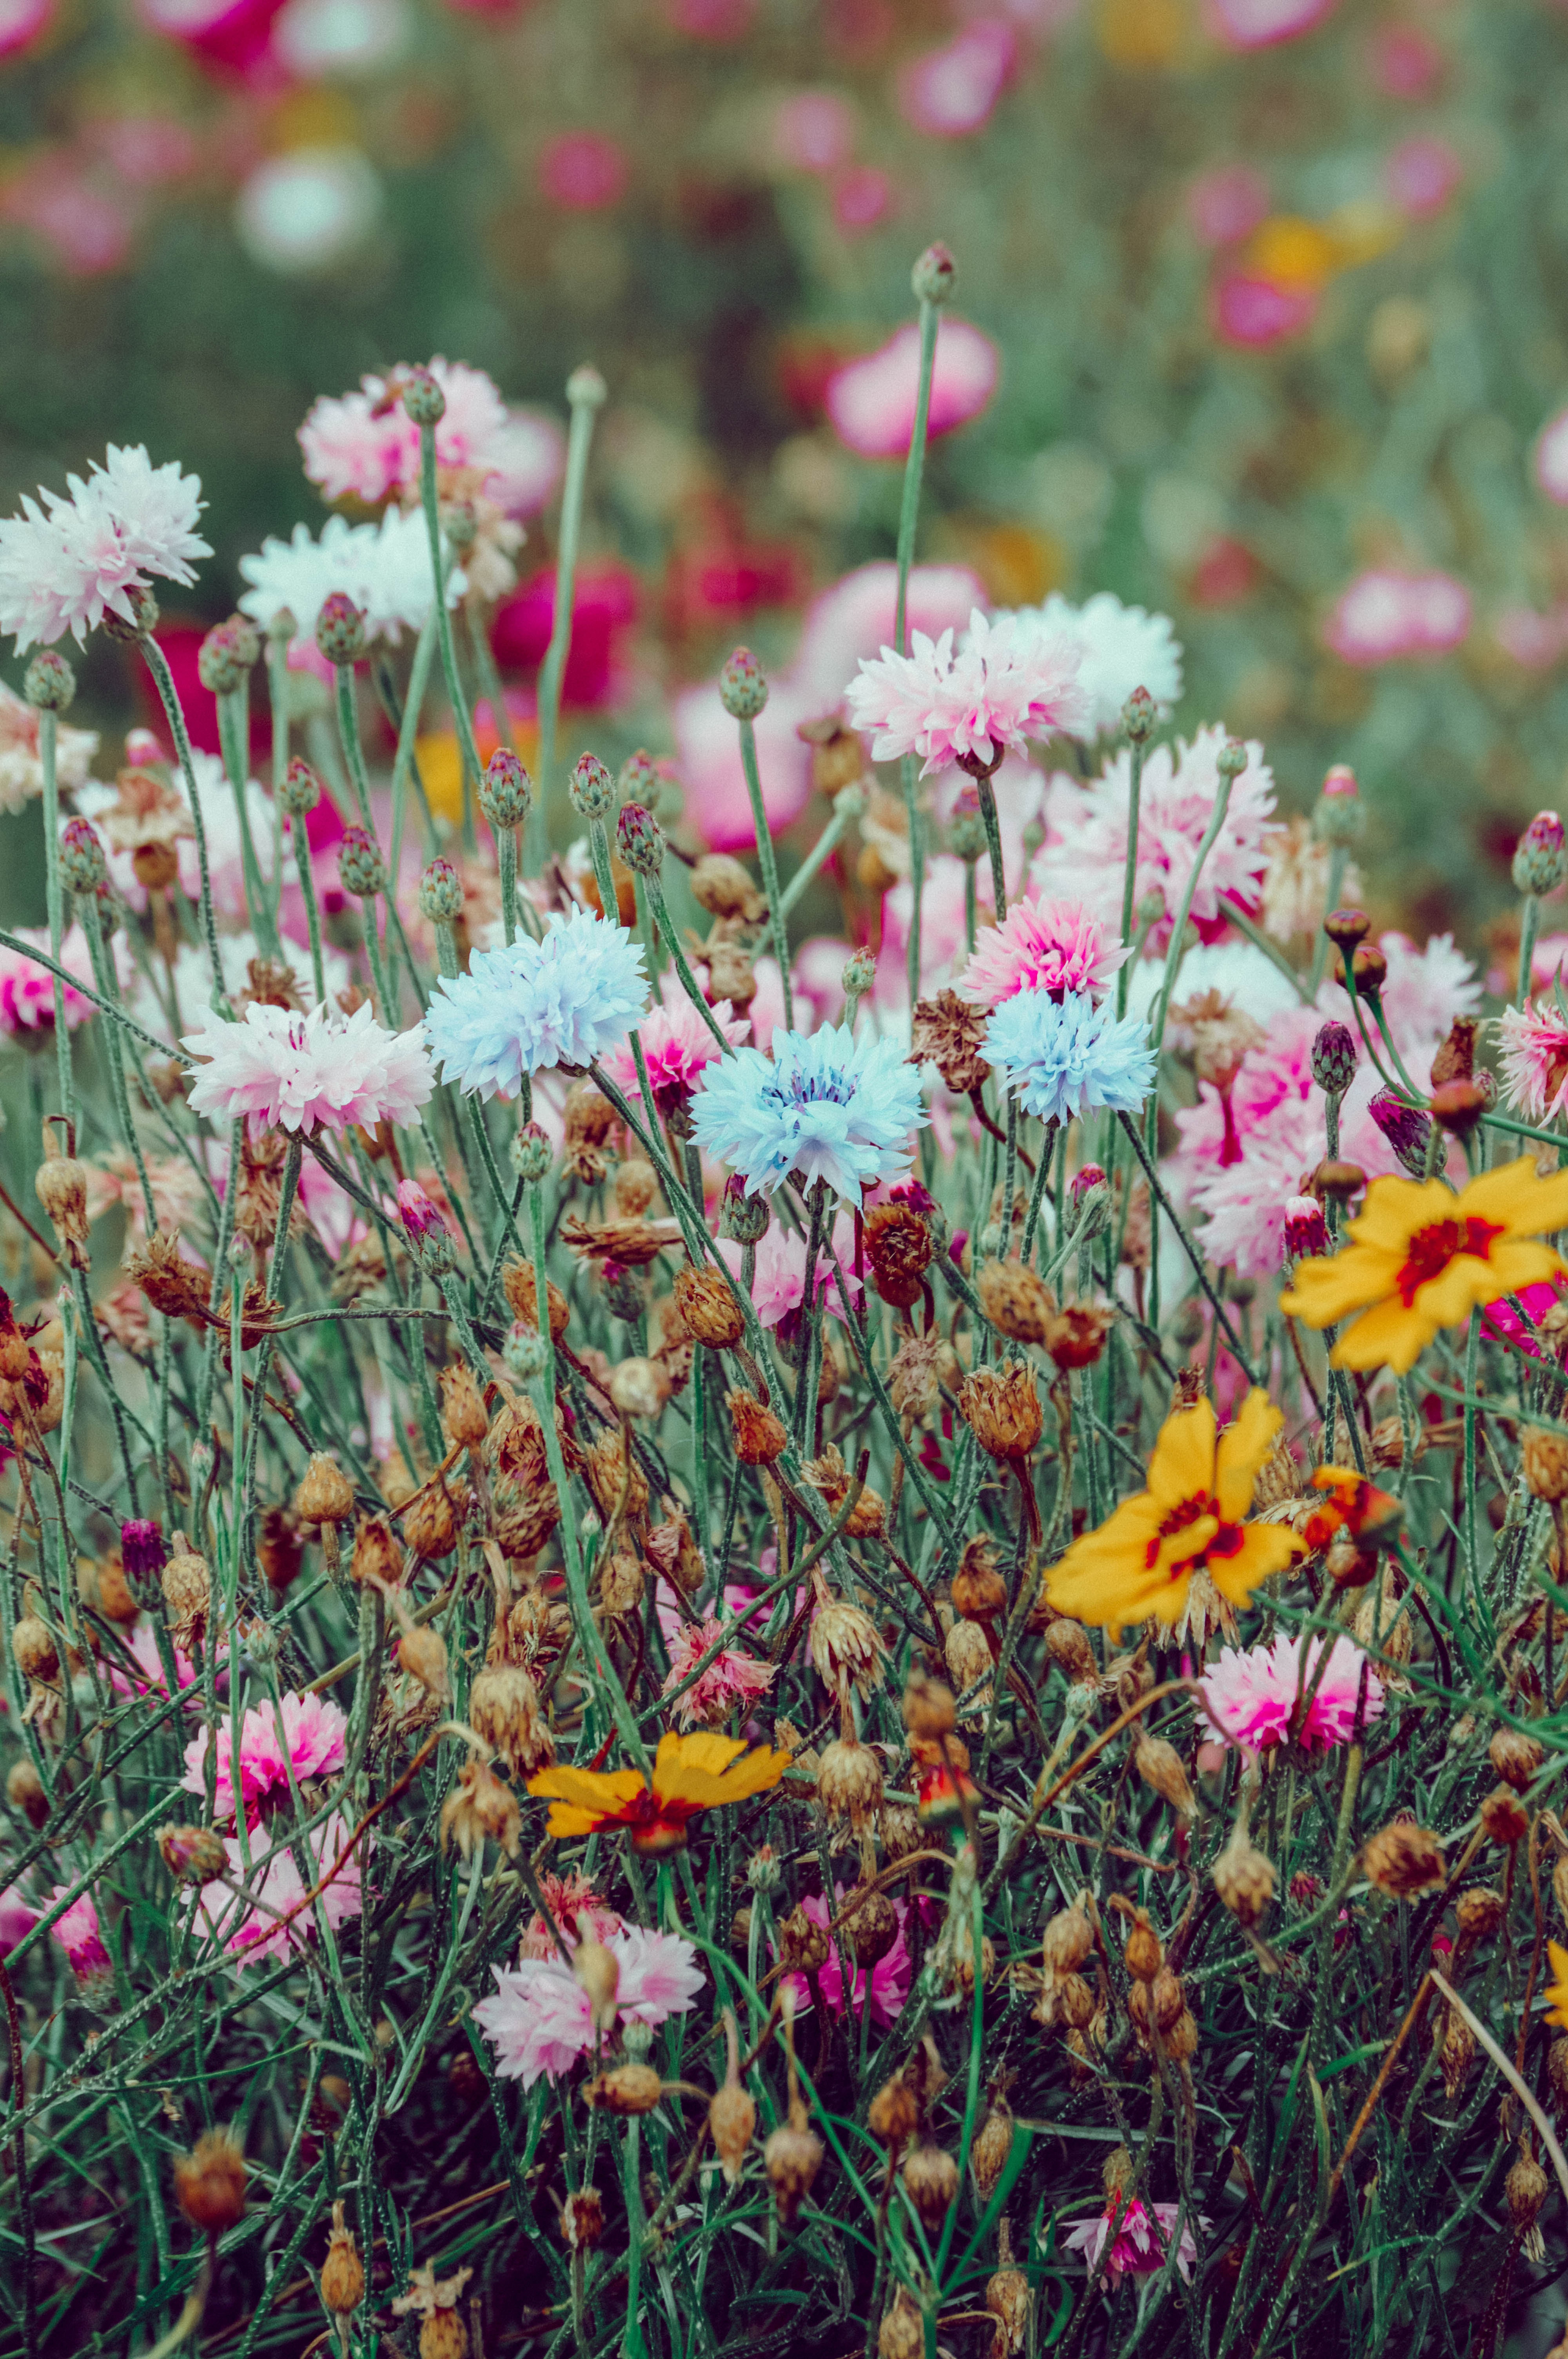 motley, nature, flowers, multicolored, field, wild